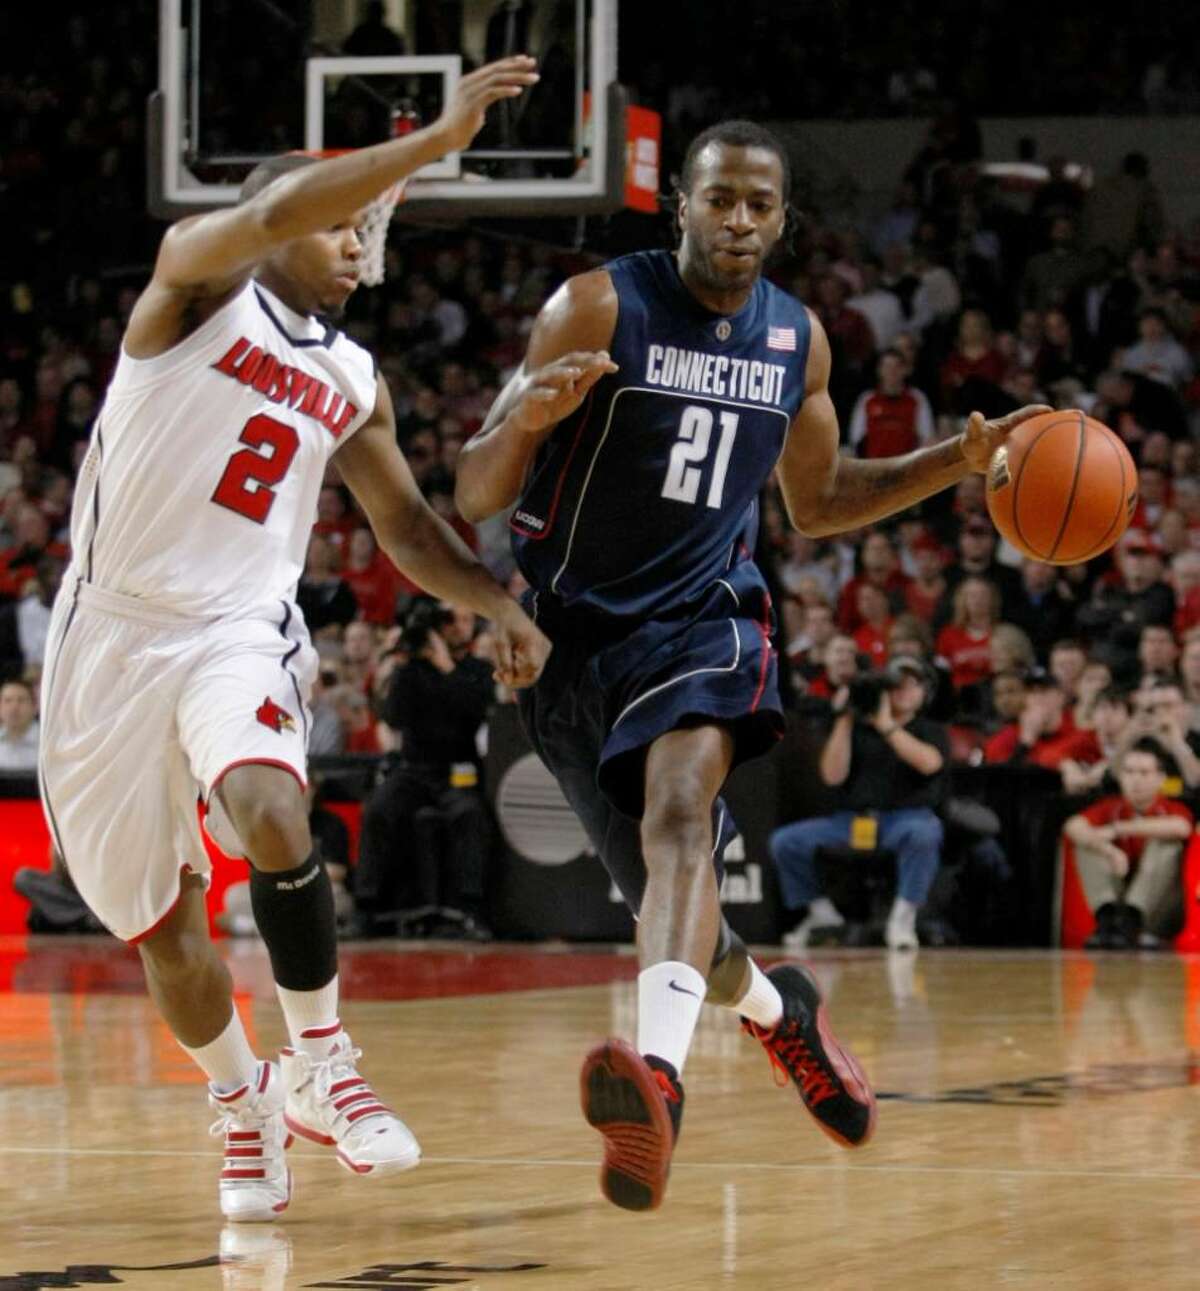 Connecticut's Stanley Robinson drives past Louisville's Preston Knowles during the first half of an NCAA college basketball game in Louisville, Ky., Monday, Feb. 1, 2010. (AP Photo/Ed Reinke)